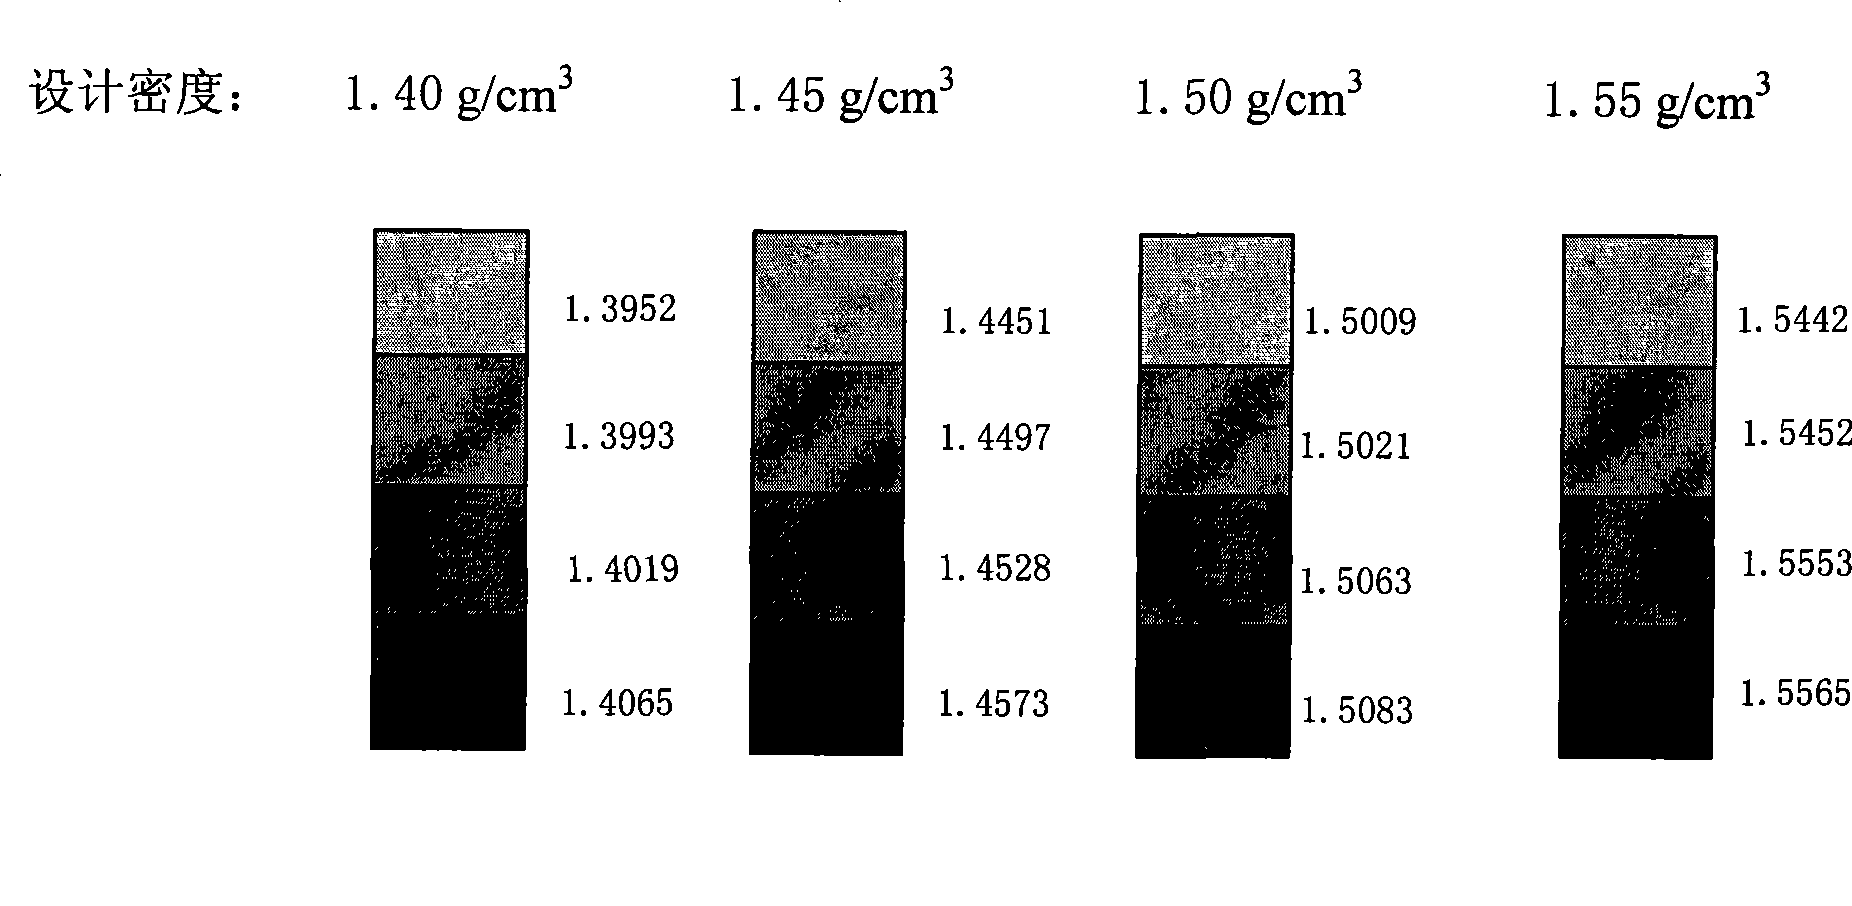 Non-floating bead low-density cement mortar